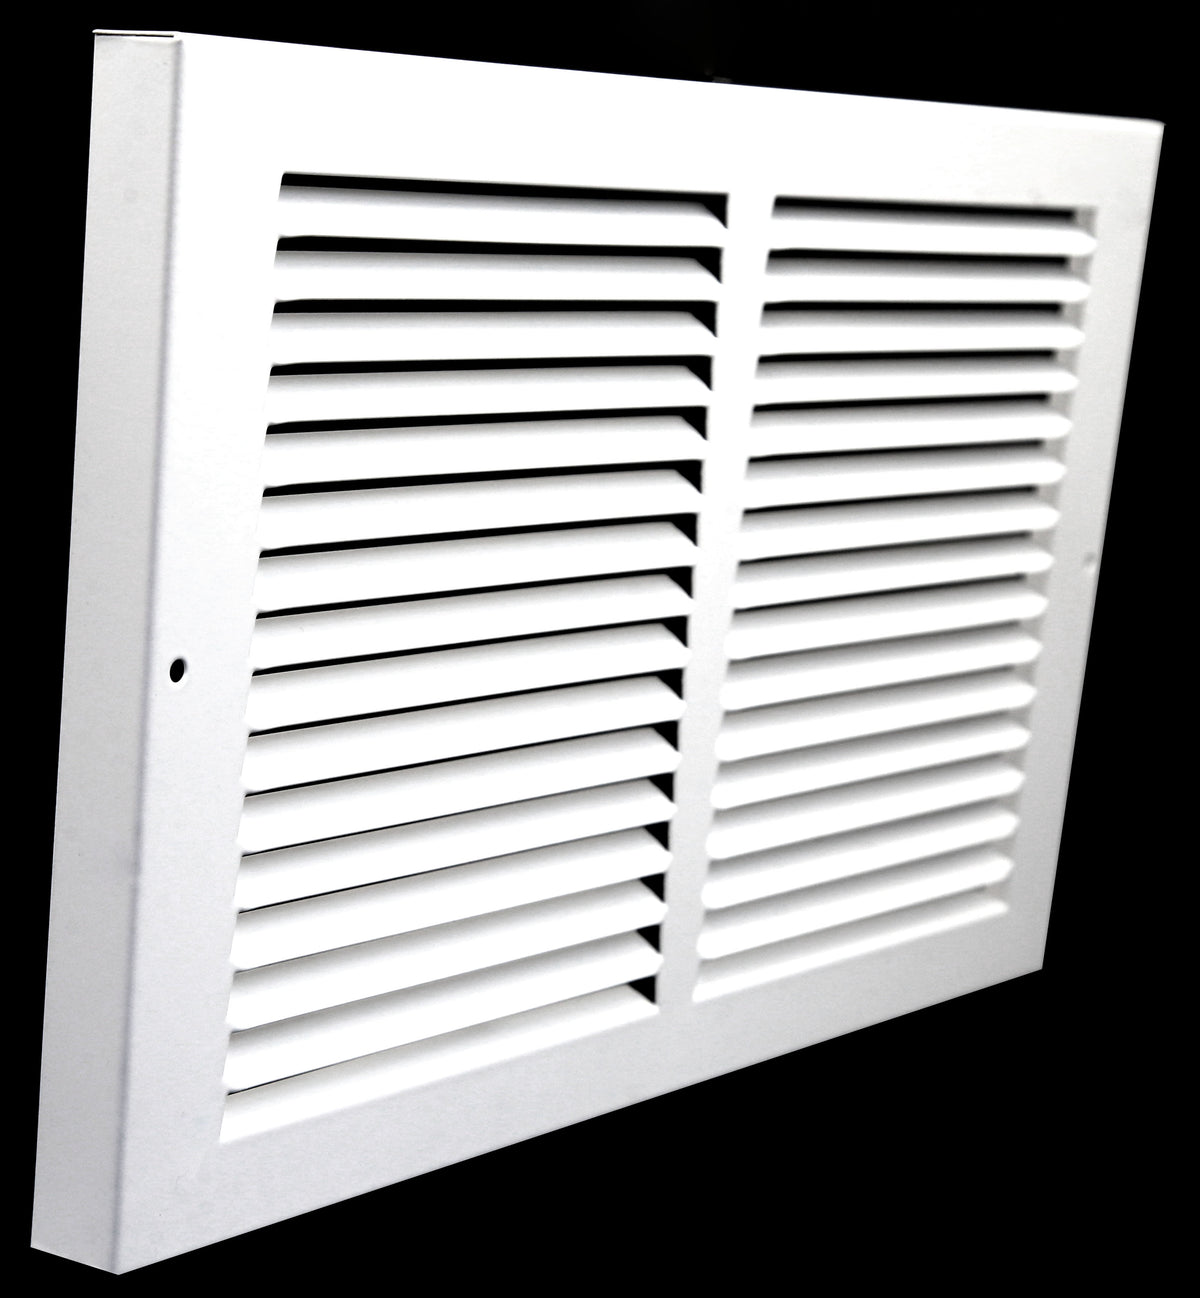 14&quot; X 6&quot; Baseboard Return Air Grille - HVAC Vent Duct Cover - 7/8&quot; Margin Turnback For Flush Fit With Baseboard Work - White